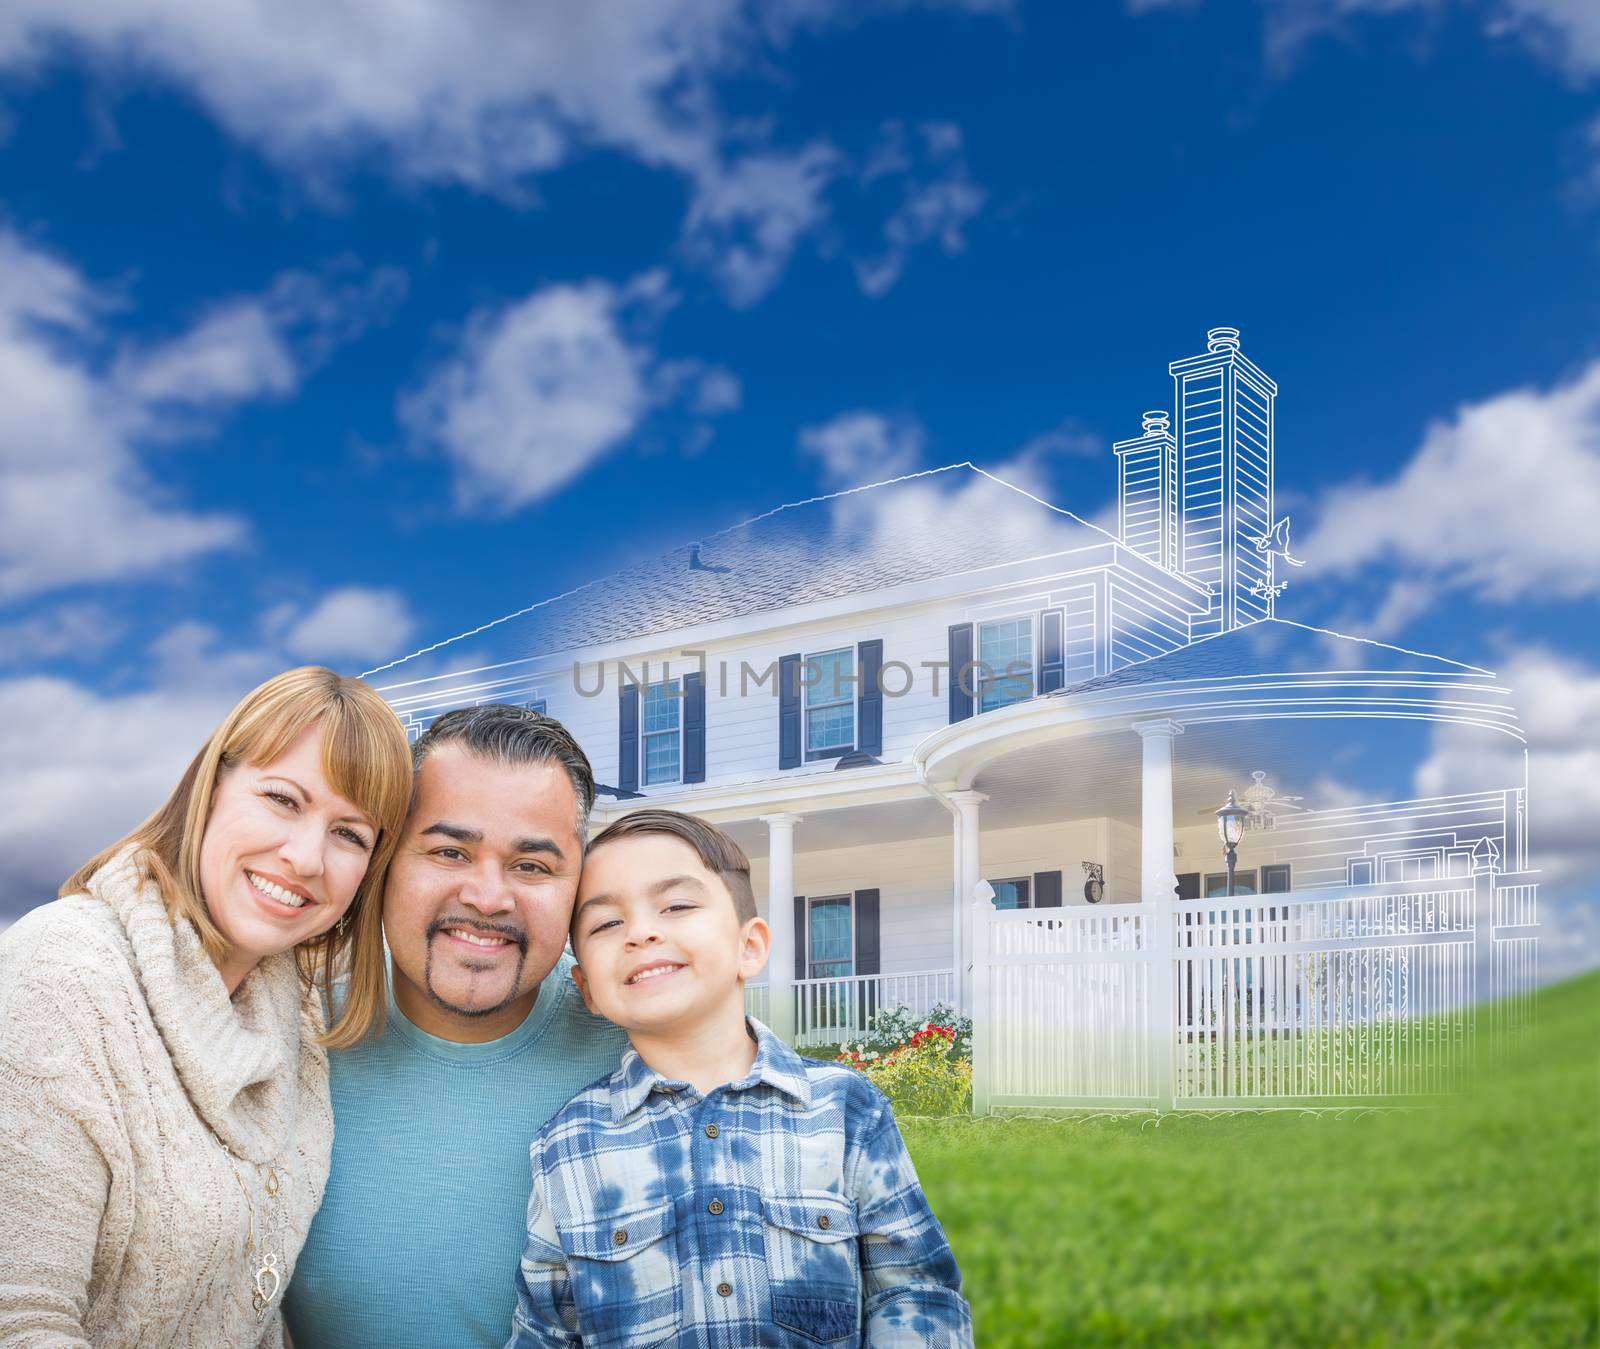 Mixed Race Hispanic and Caucasian Family In Front of Ghosted House Drawing on Grass. by Feverpitched